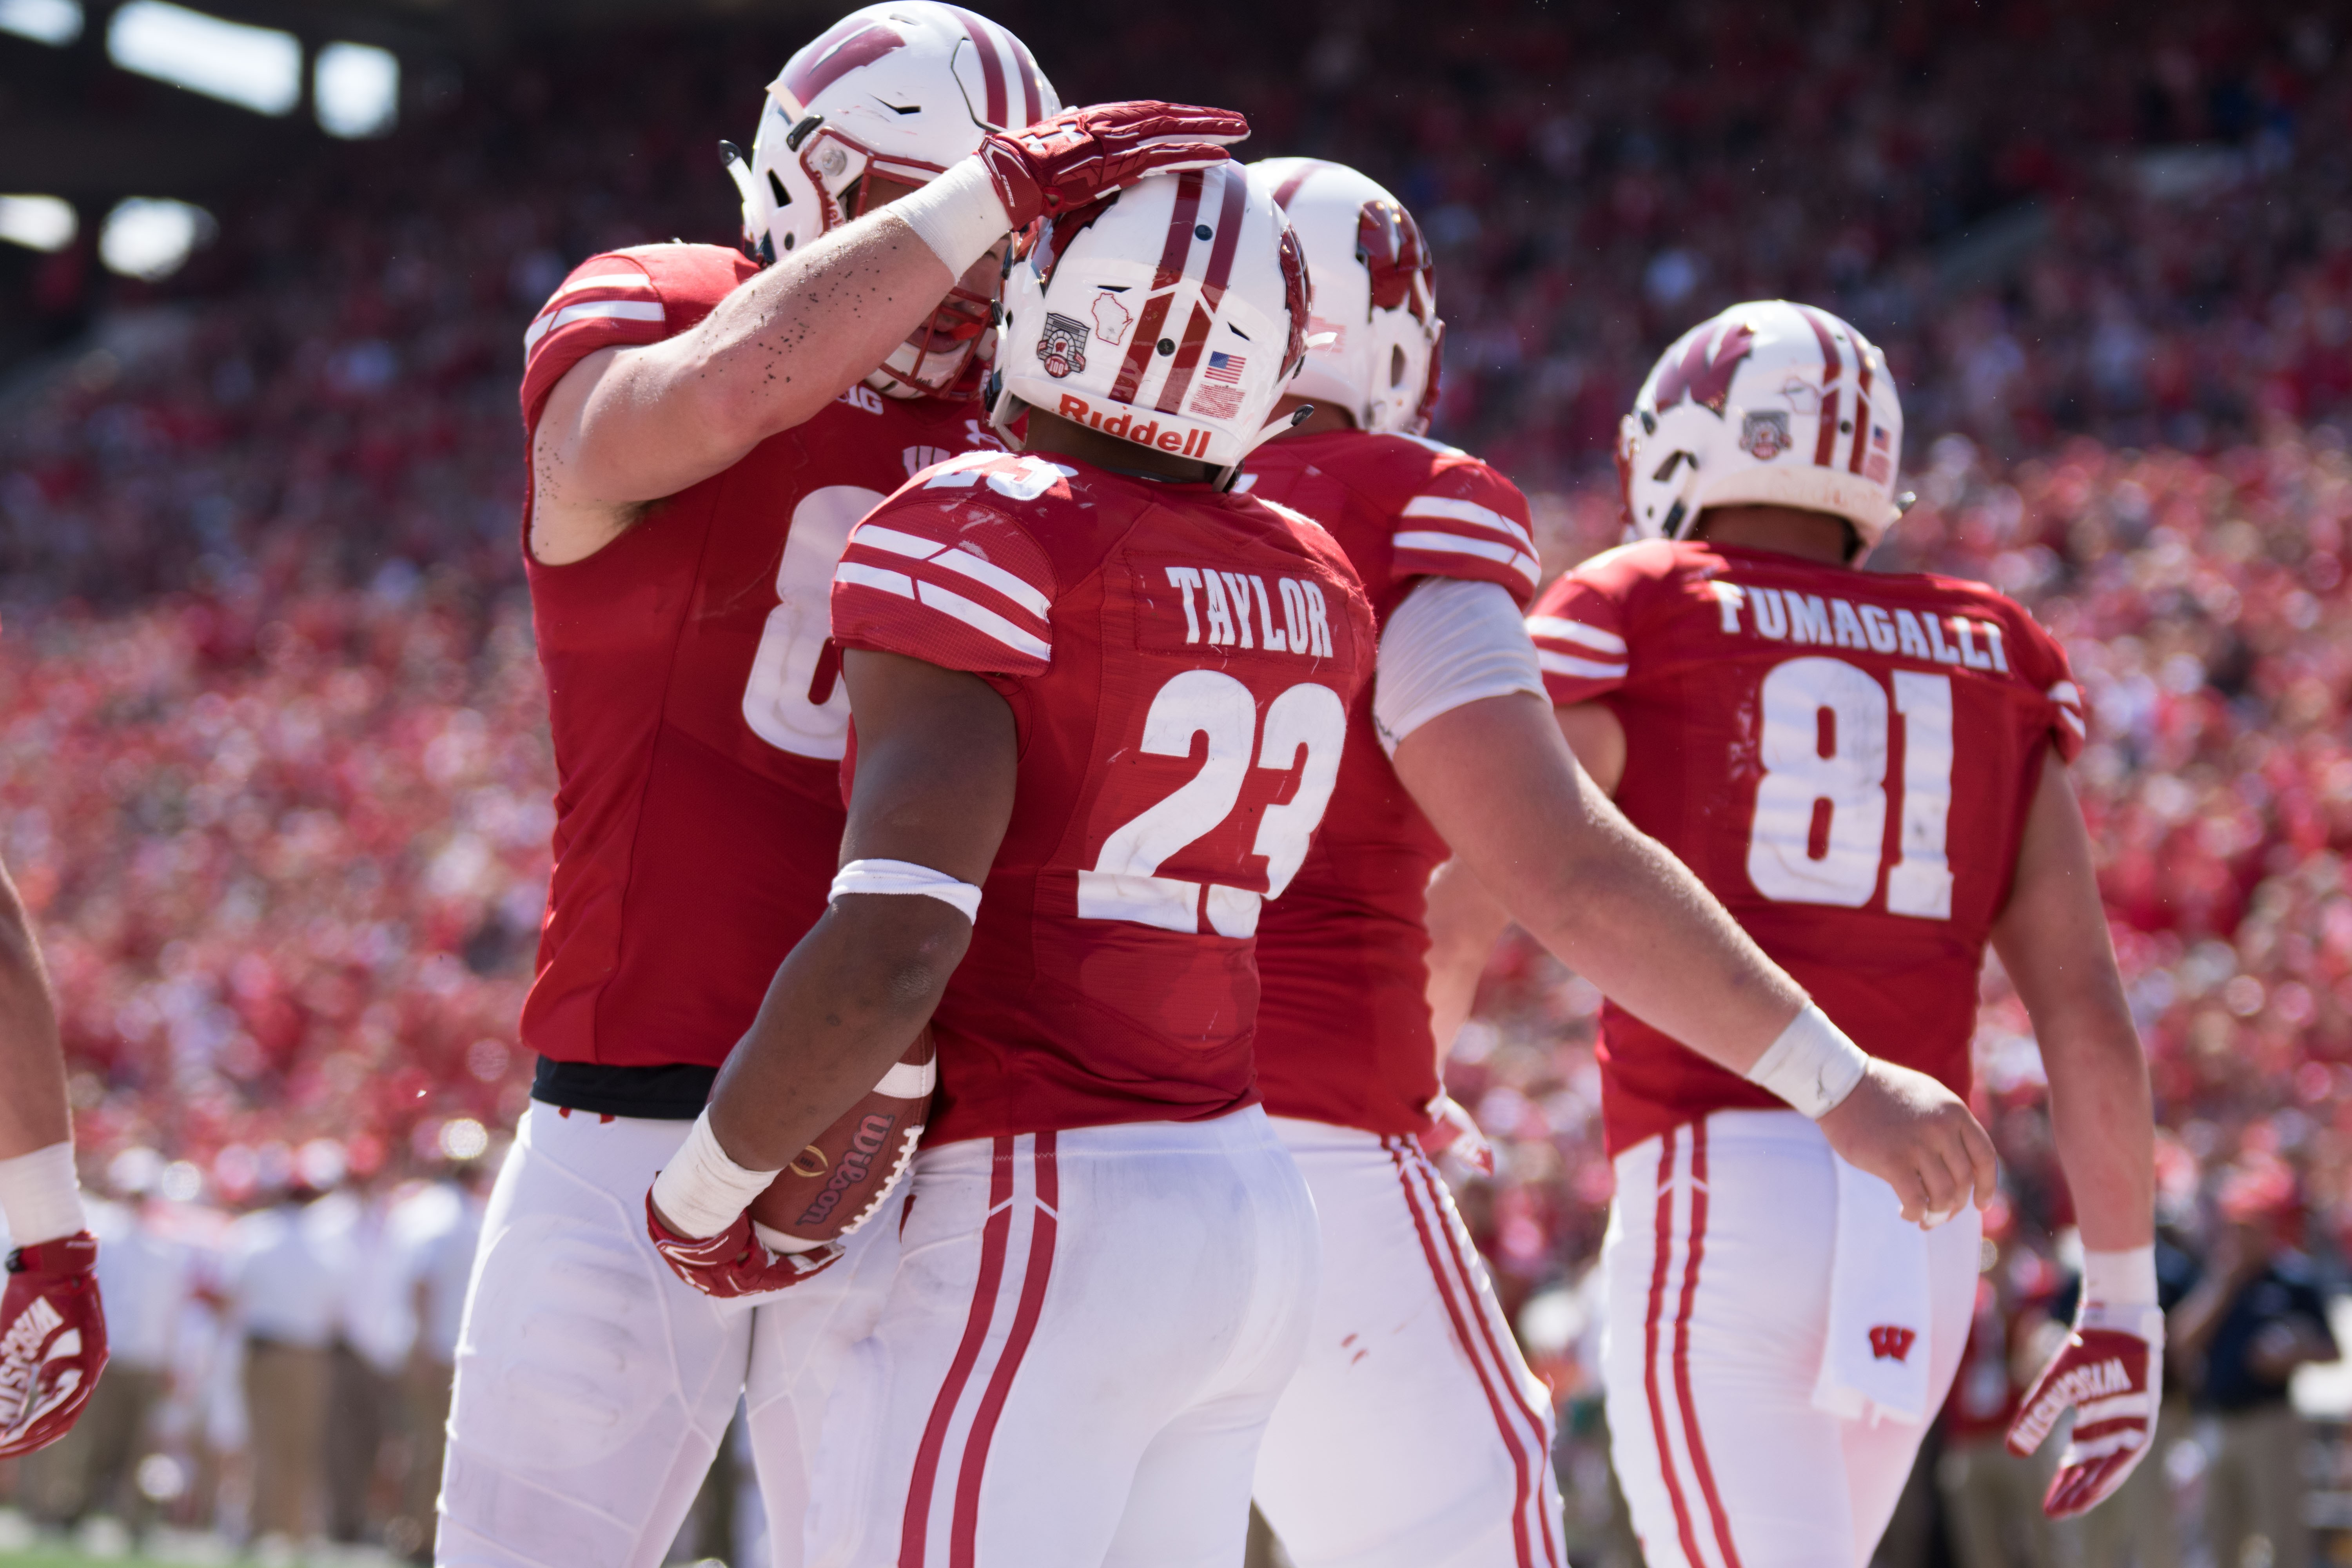 Wisconsin football celebrates by taking on Terrapins in